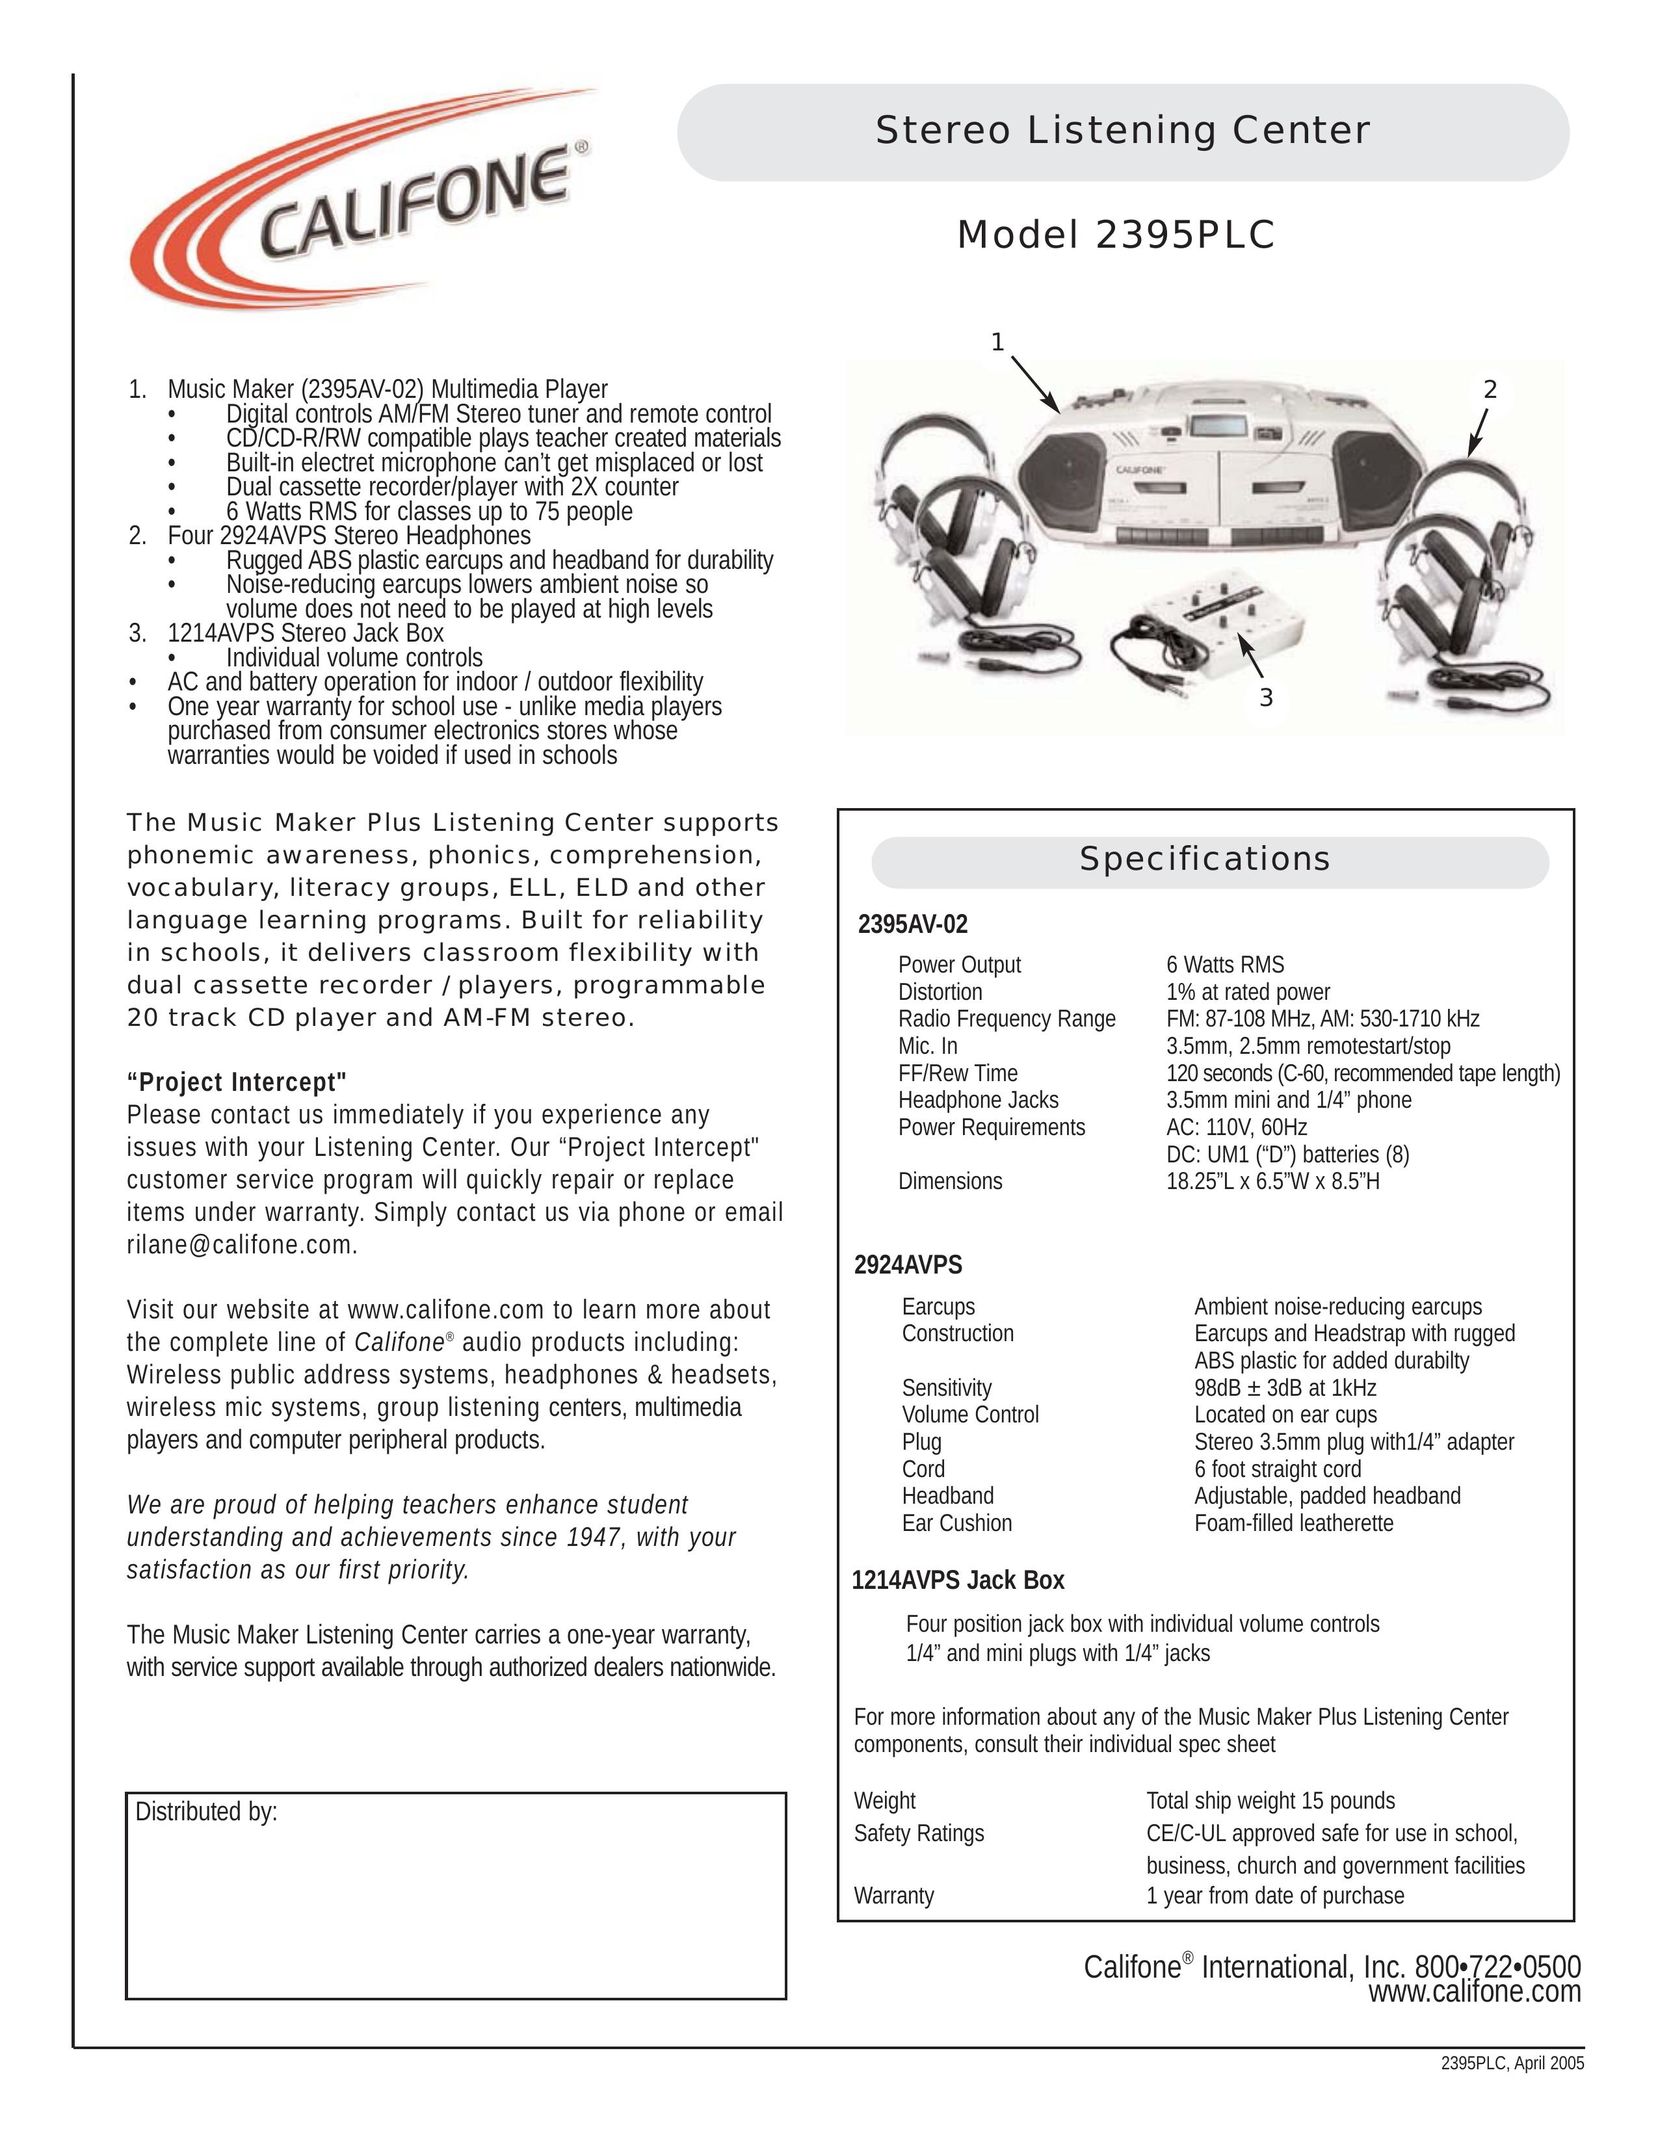 Califone 2395PLC Portable Stereo System User Manual